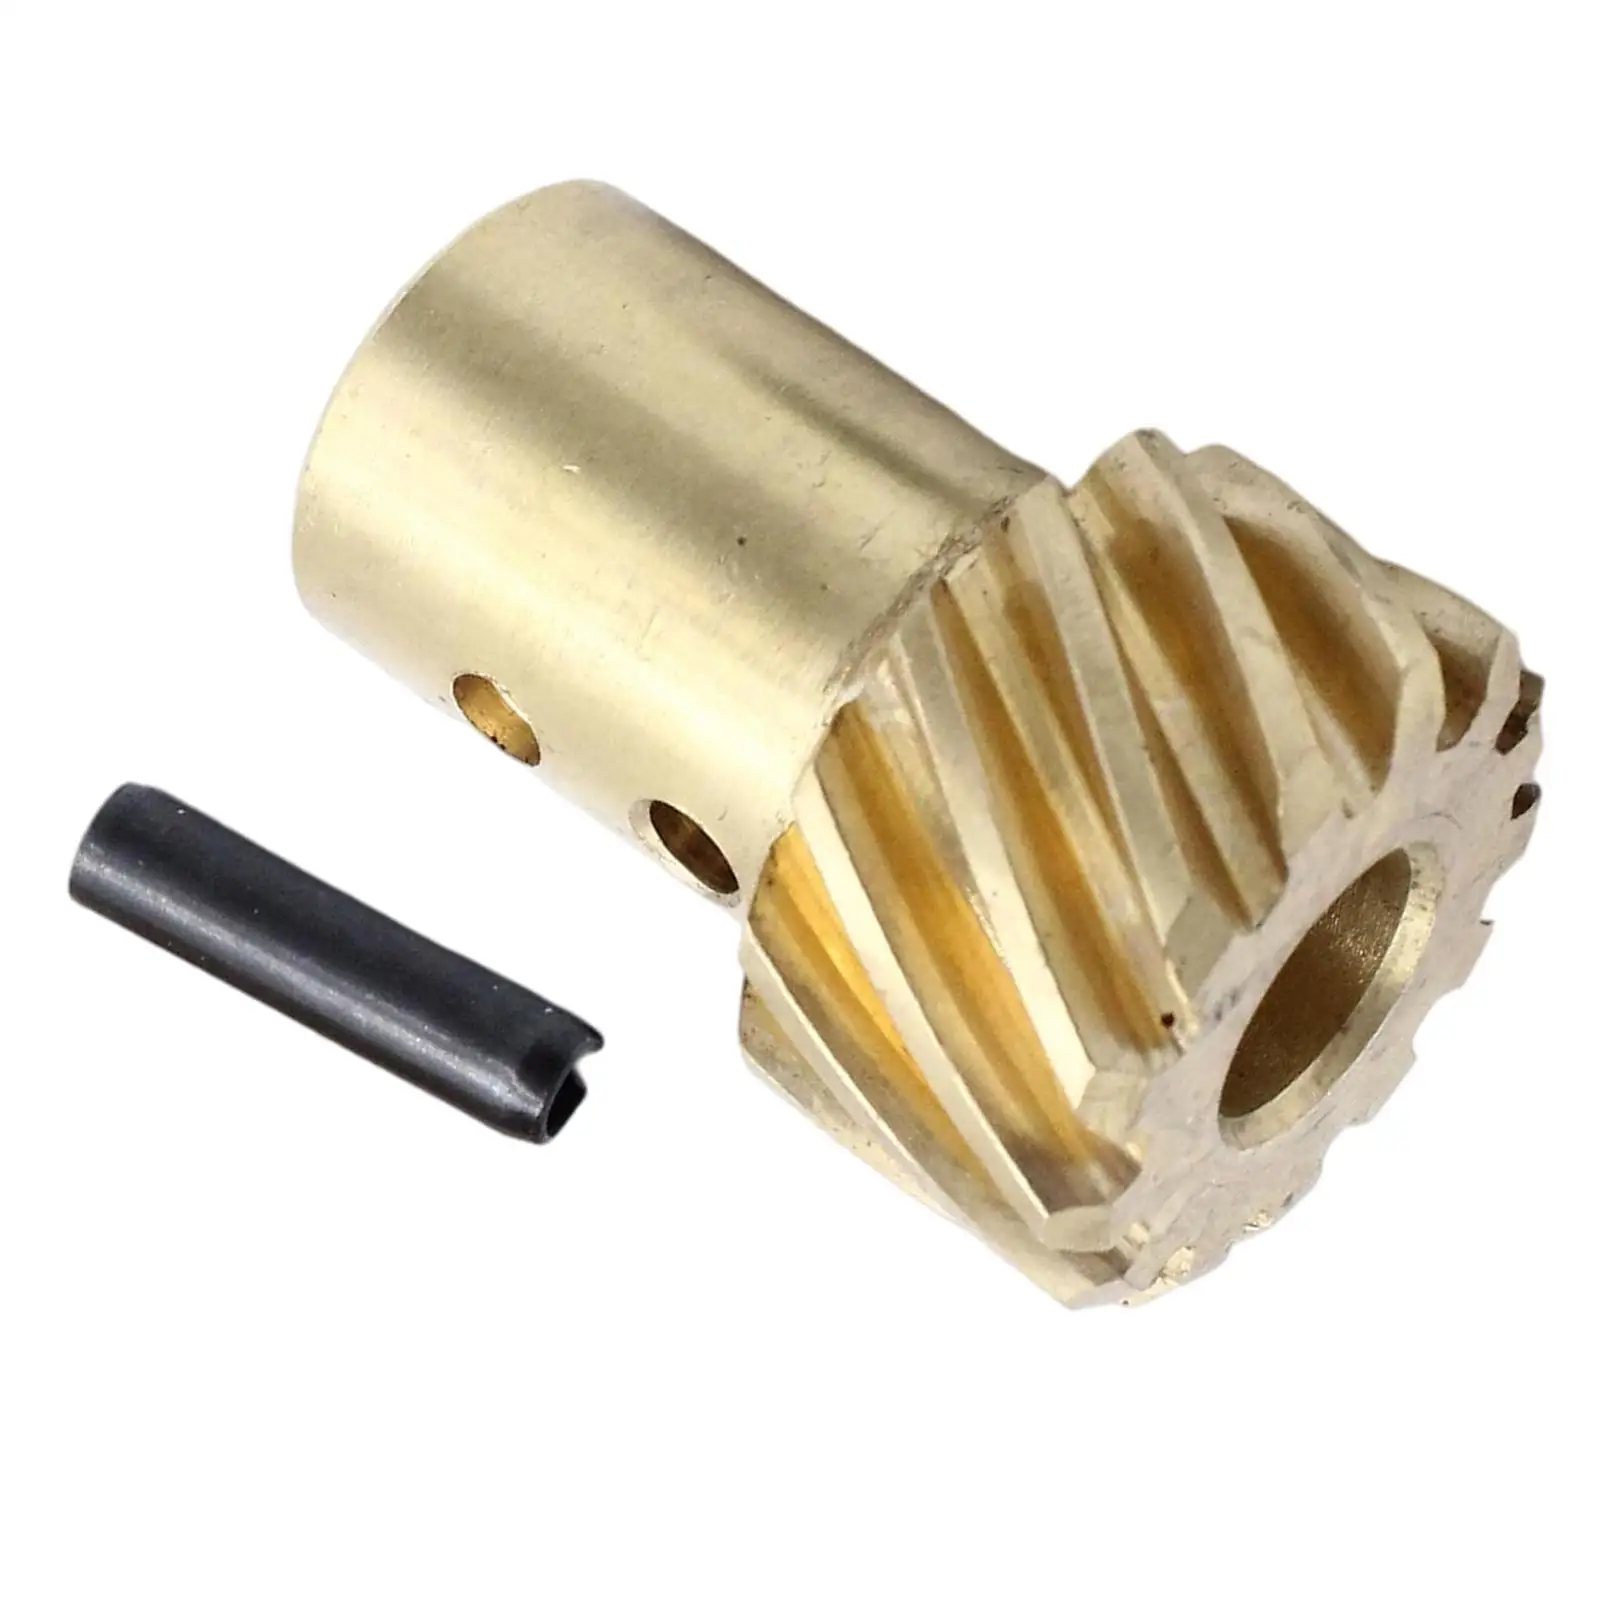 Vehicle Roller cam Bronze Distributor Gear .491 inch Diameter Parts for Chevy Sbc Small and Big Block